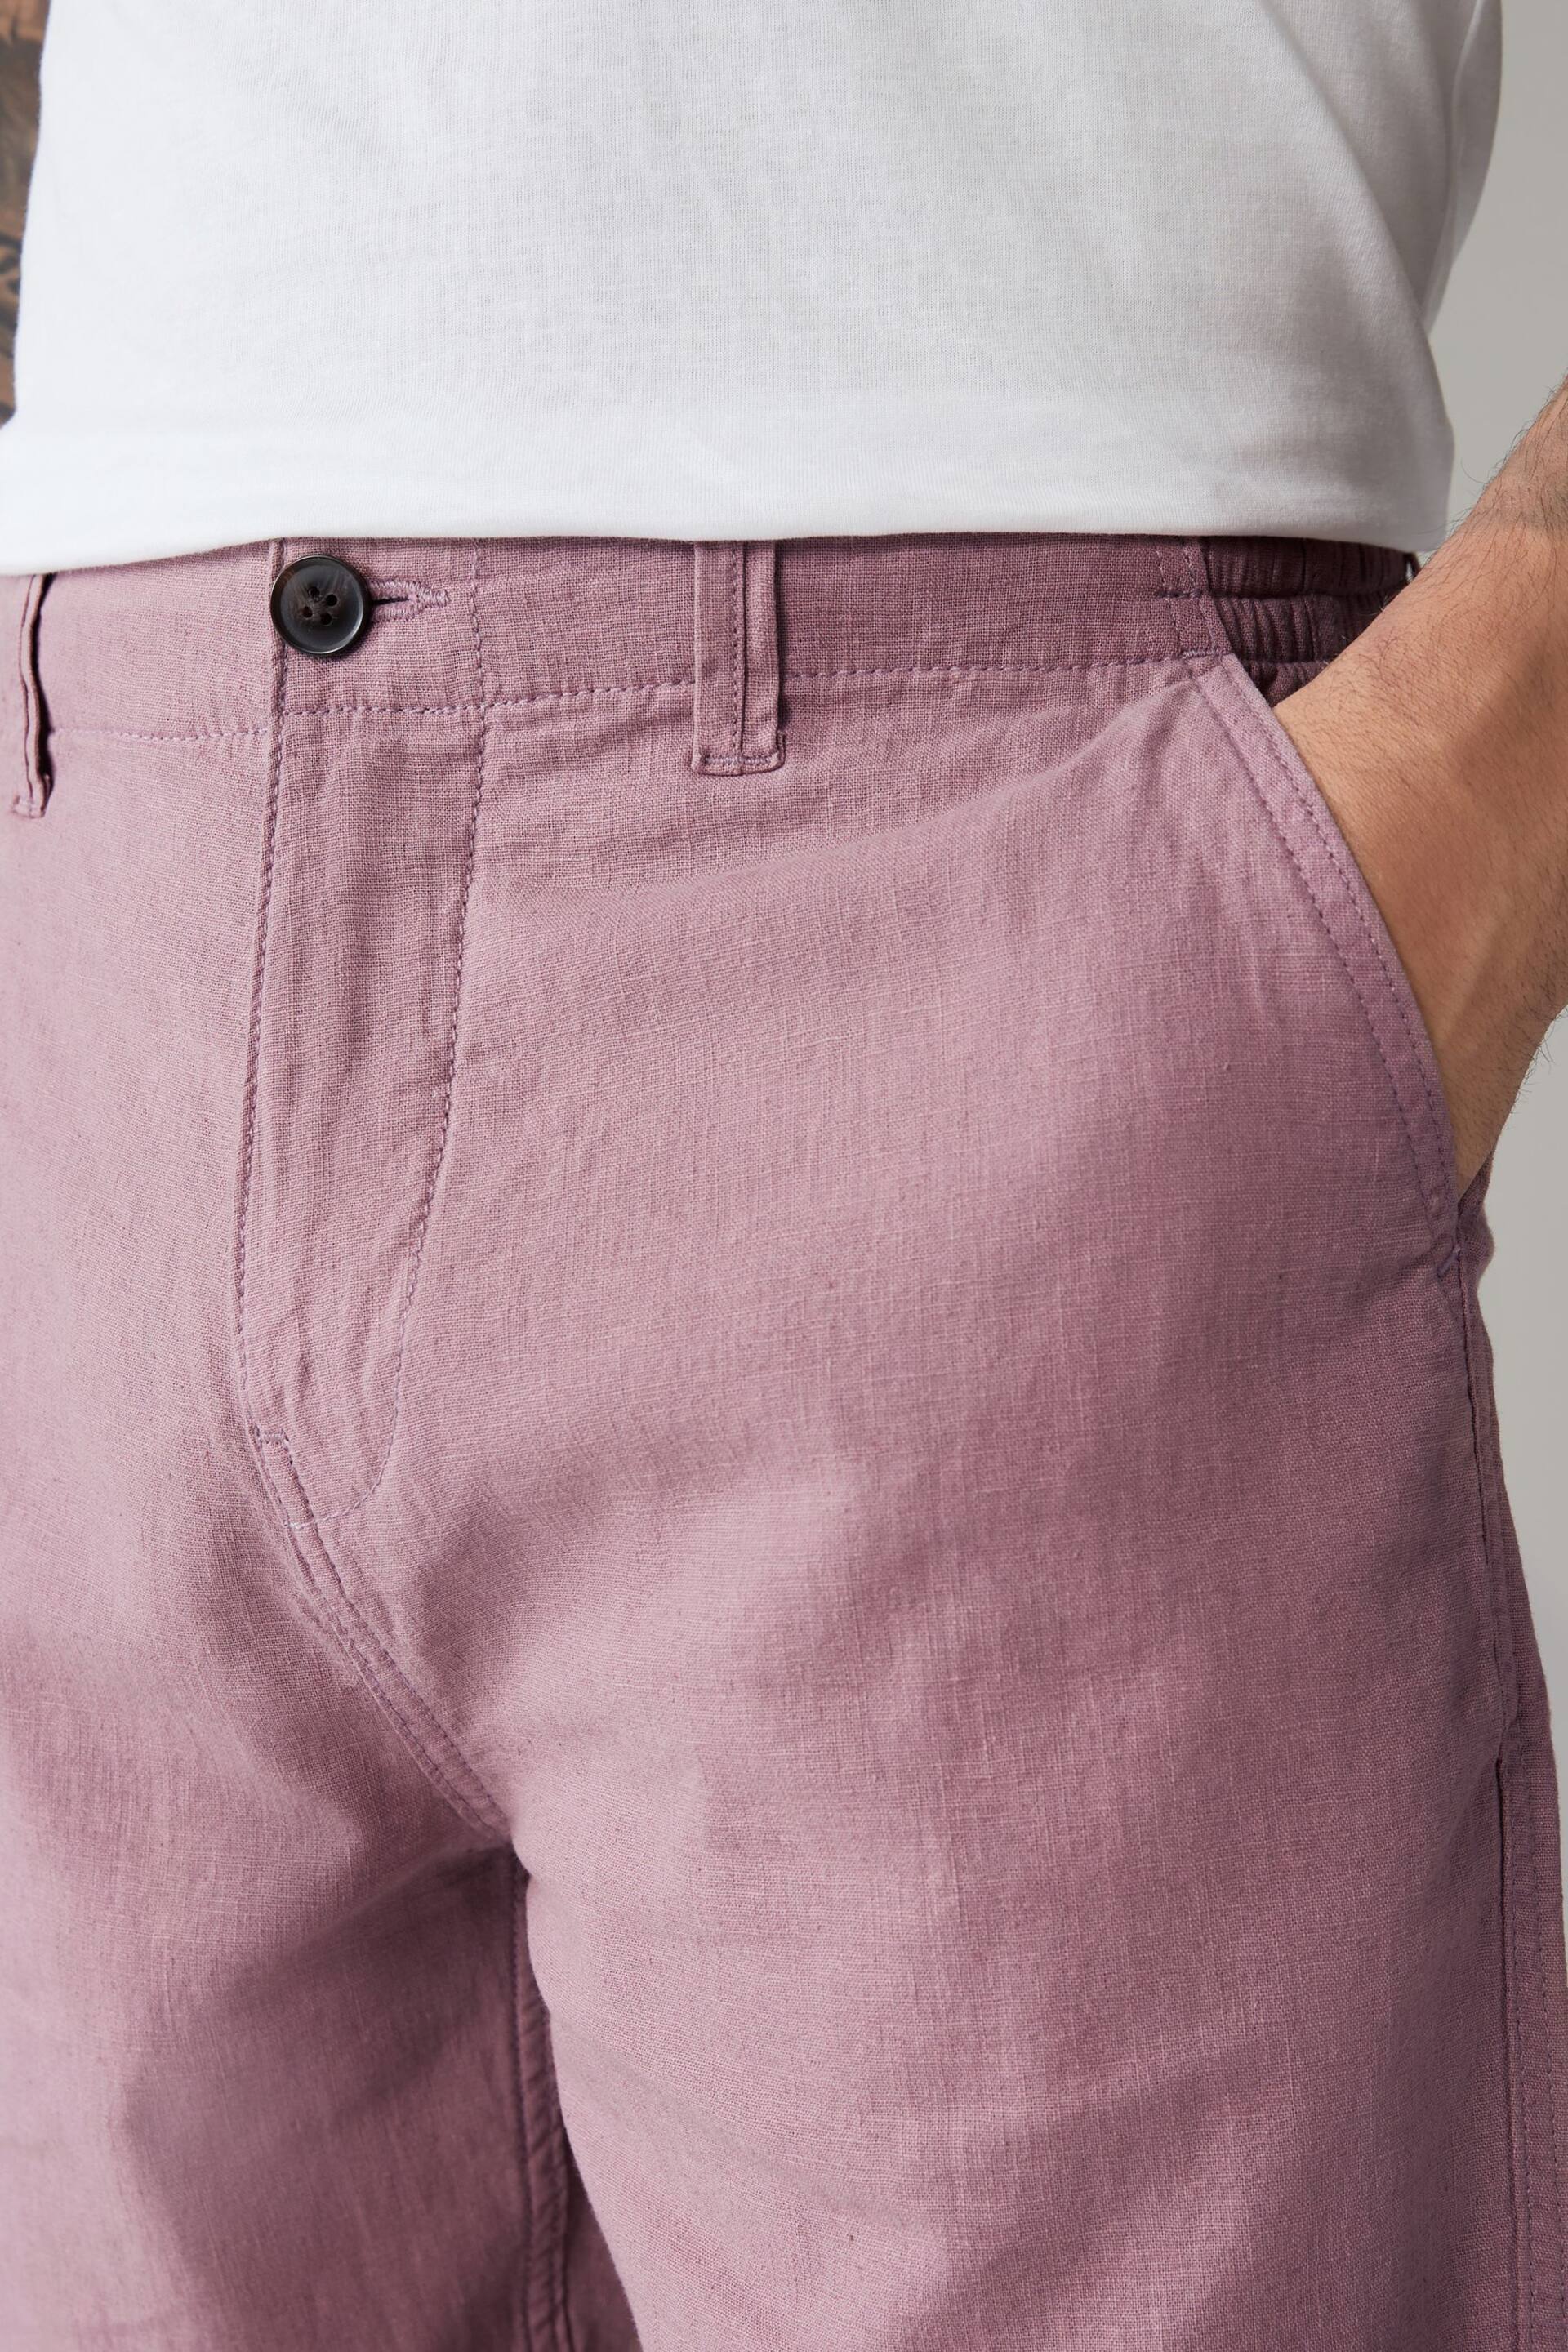 Pink Linen Blend Chino Shorts - Image 4 of 9